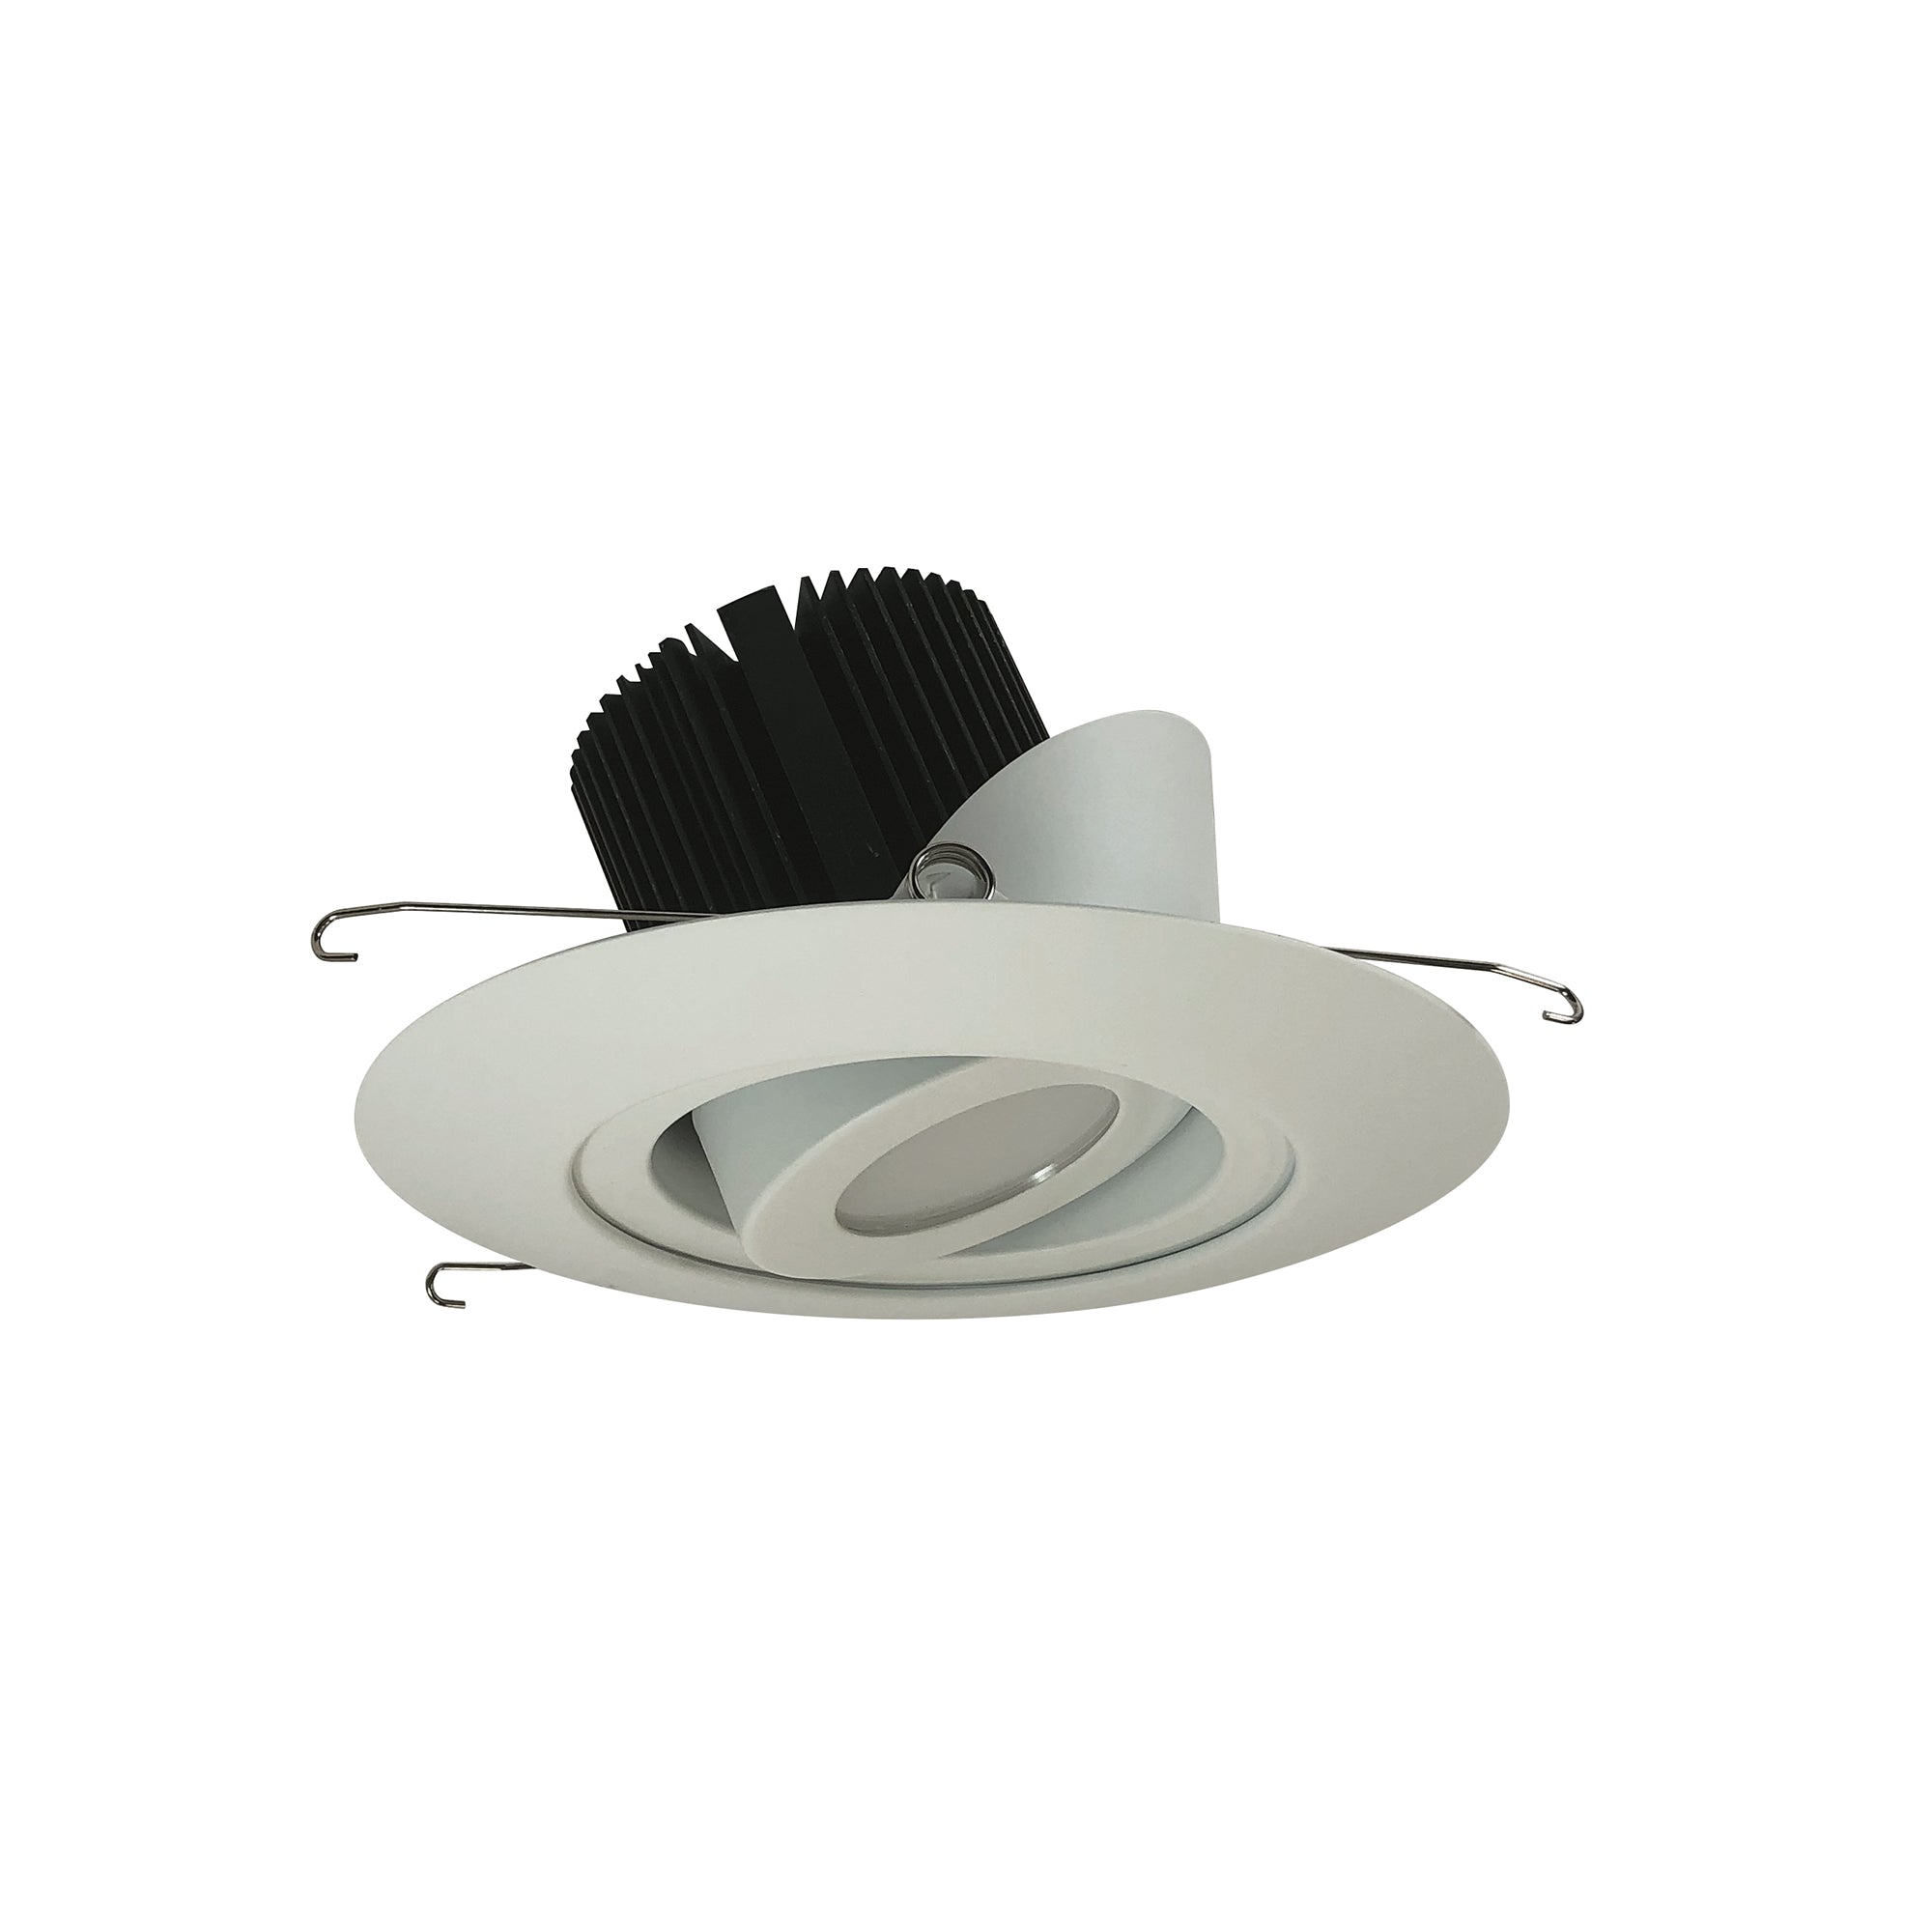 Nora Lighting NRM2-614L2535SWW - Recessed - 6 Inch Marquise II Round Surface Adjustable Trim, Spot, 2500lm, 3500K, White (Not Compatible with NHRM2-625 Housings)